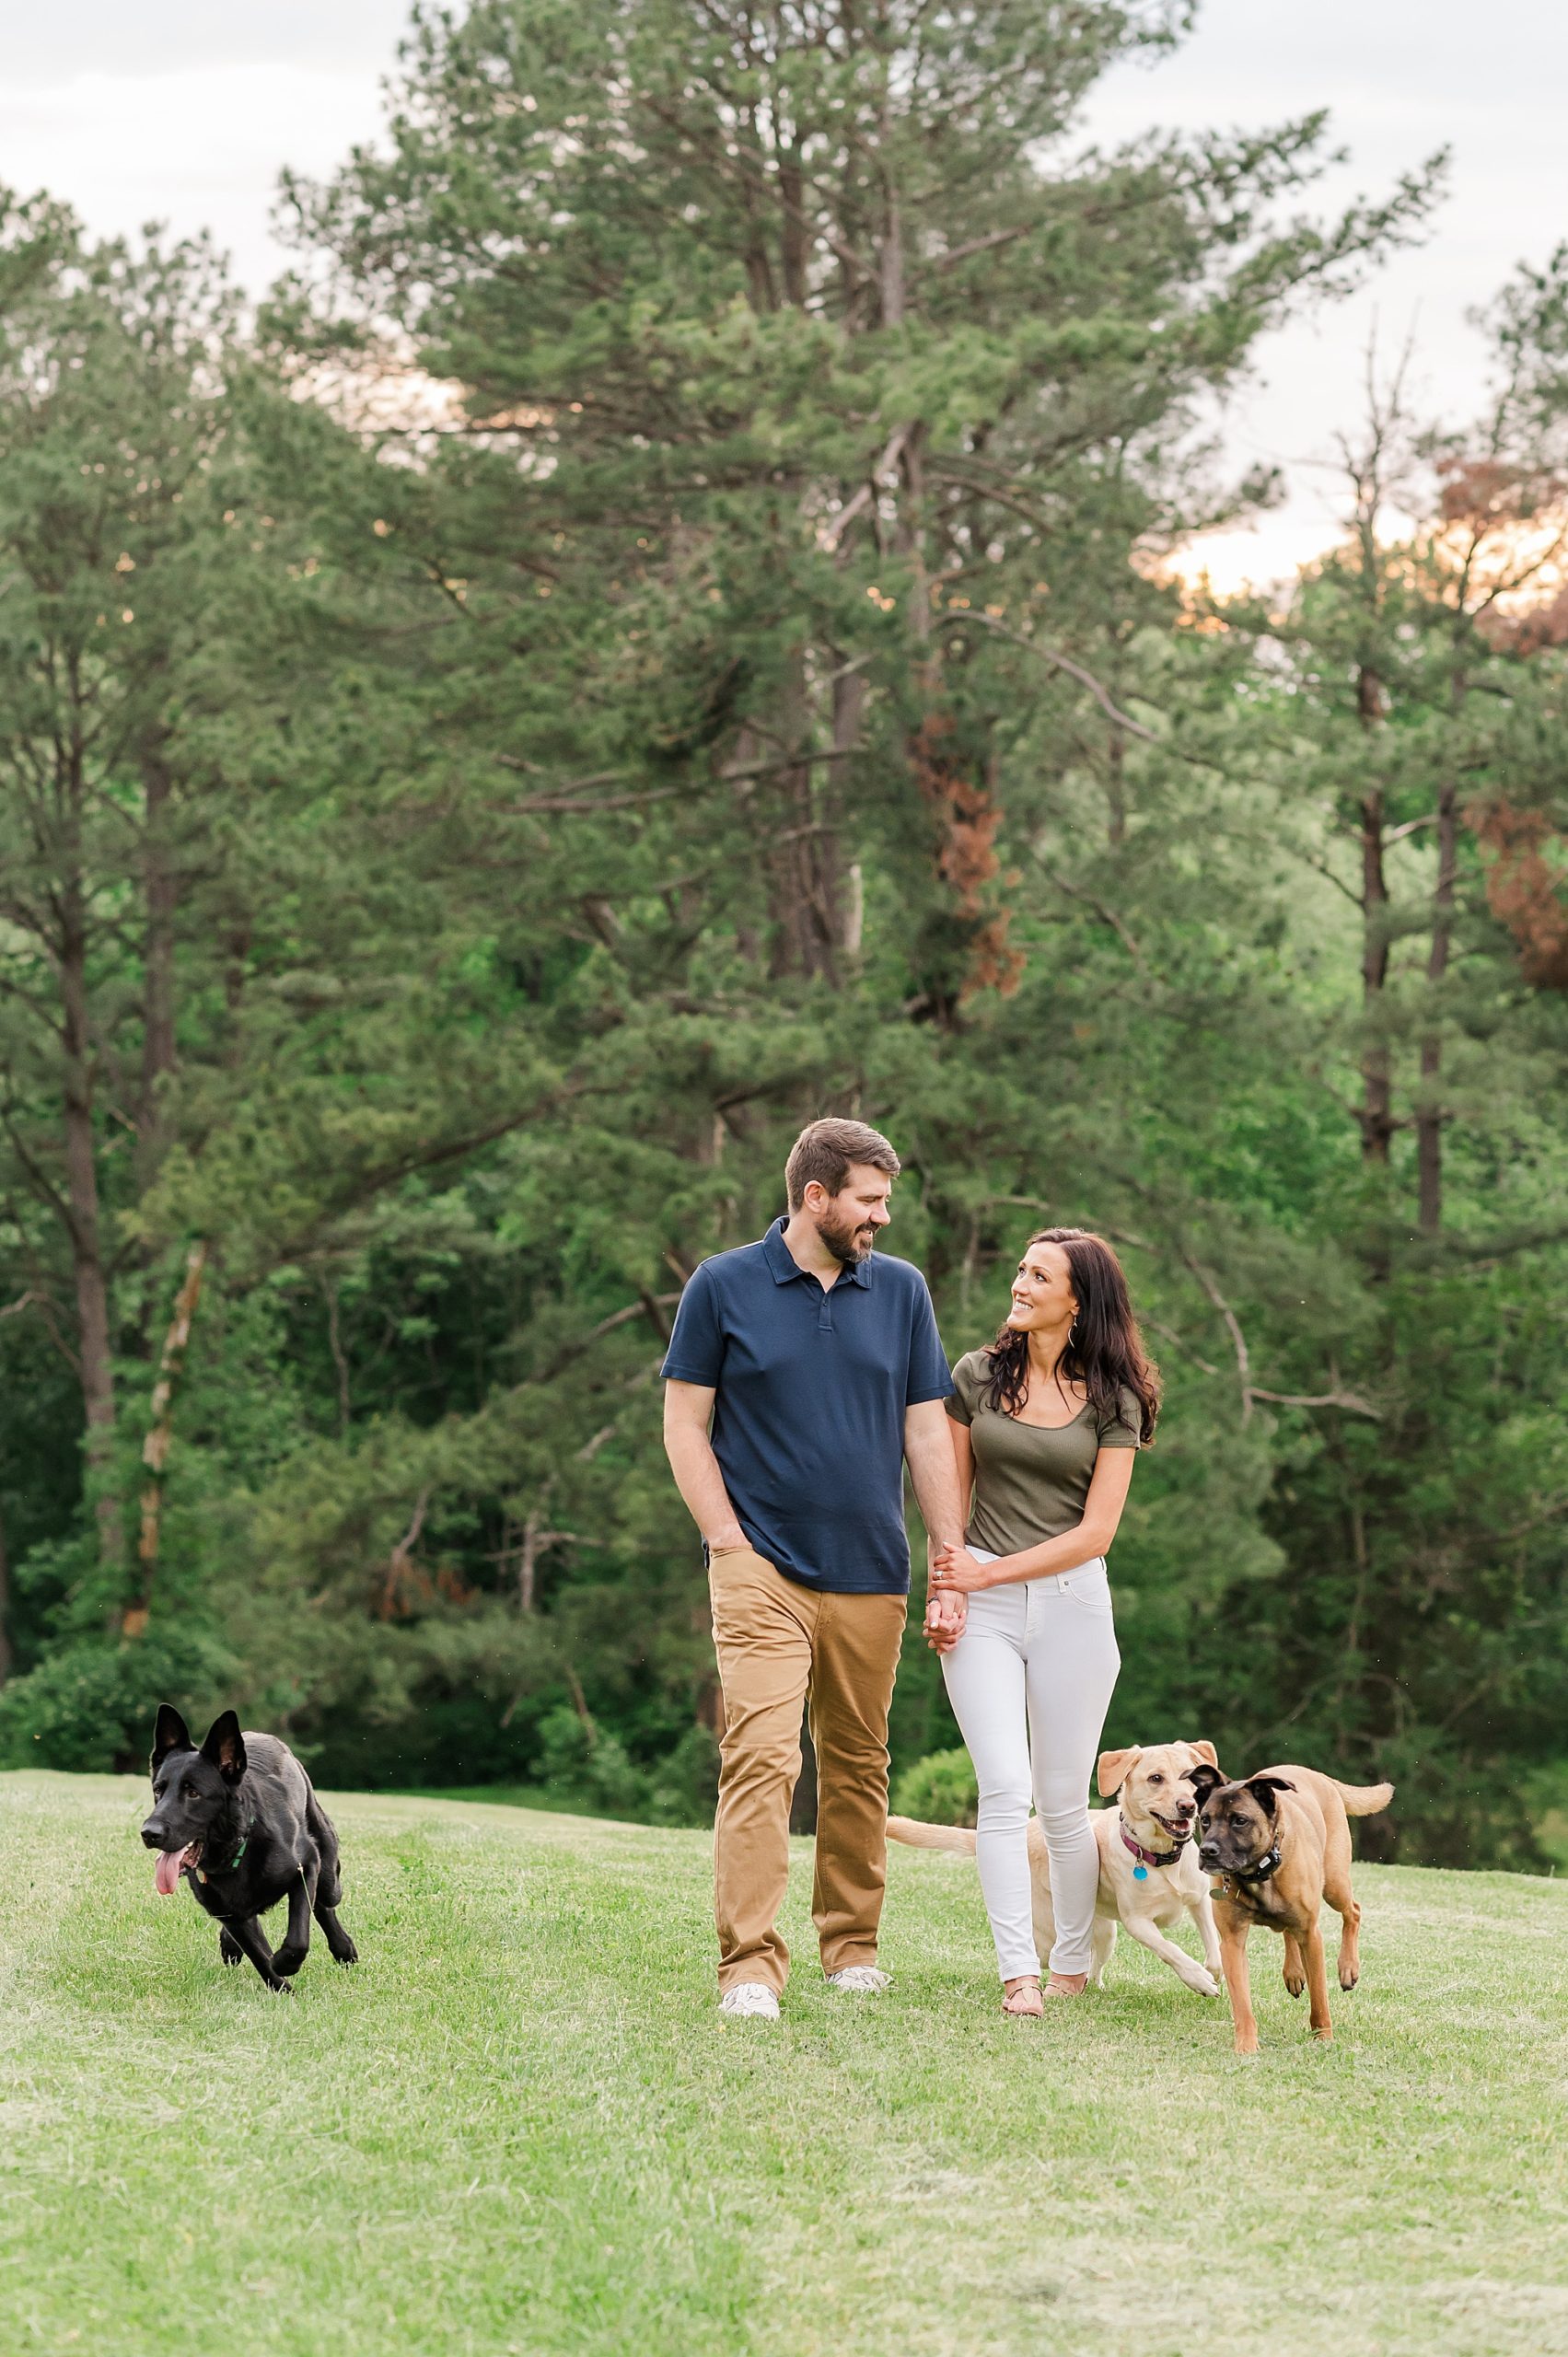 Spring Engagement Session with Rolling Hills and Dogs